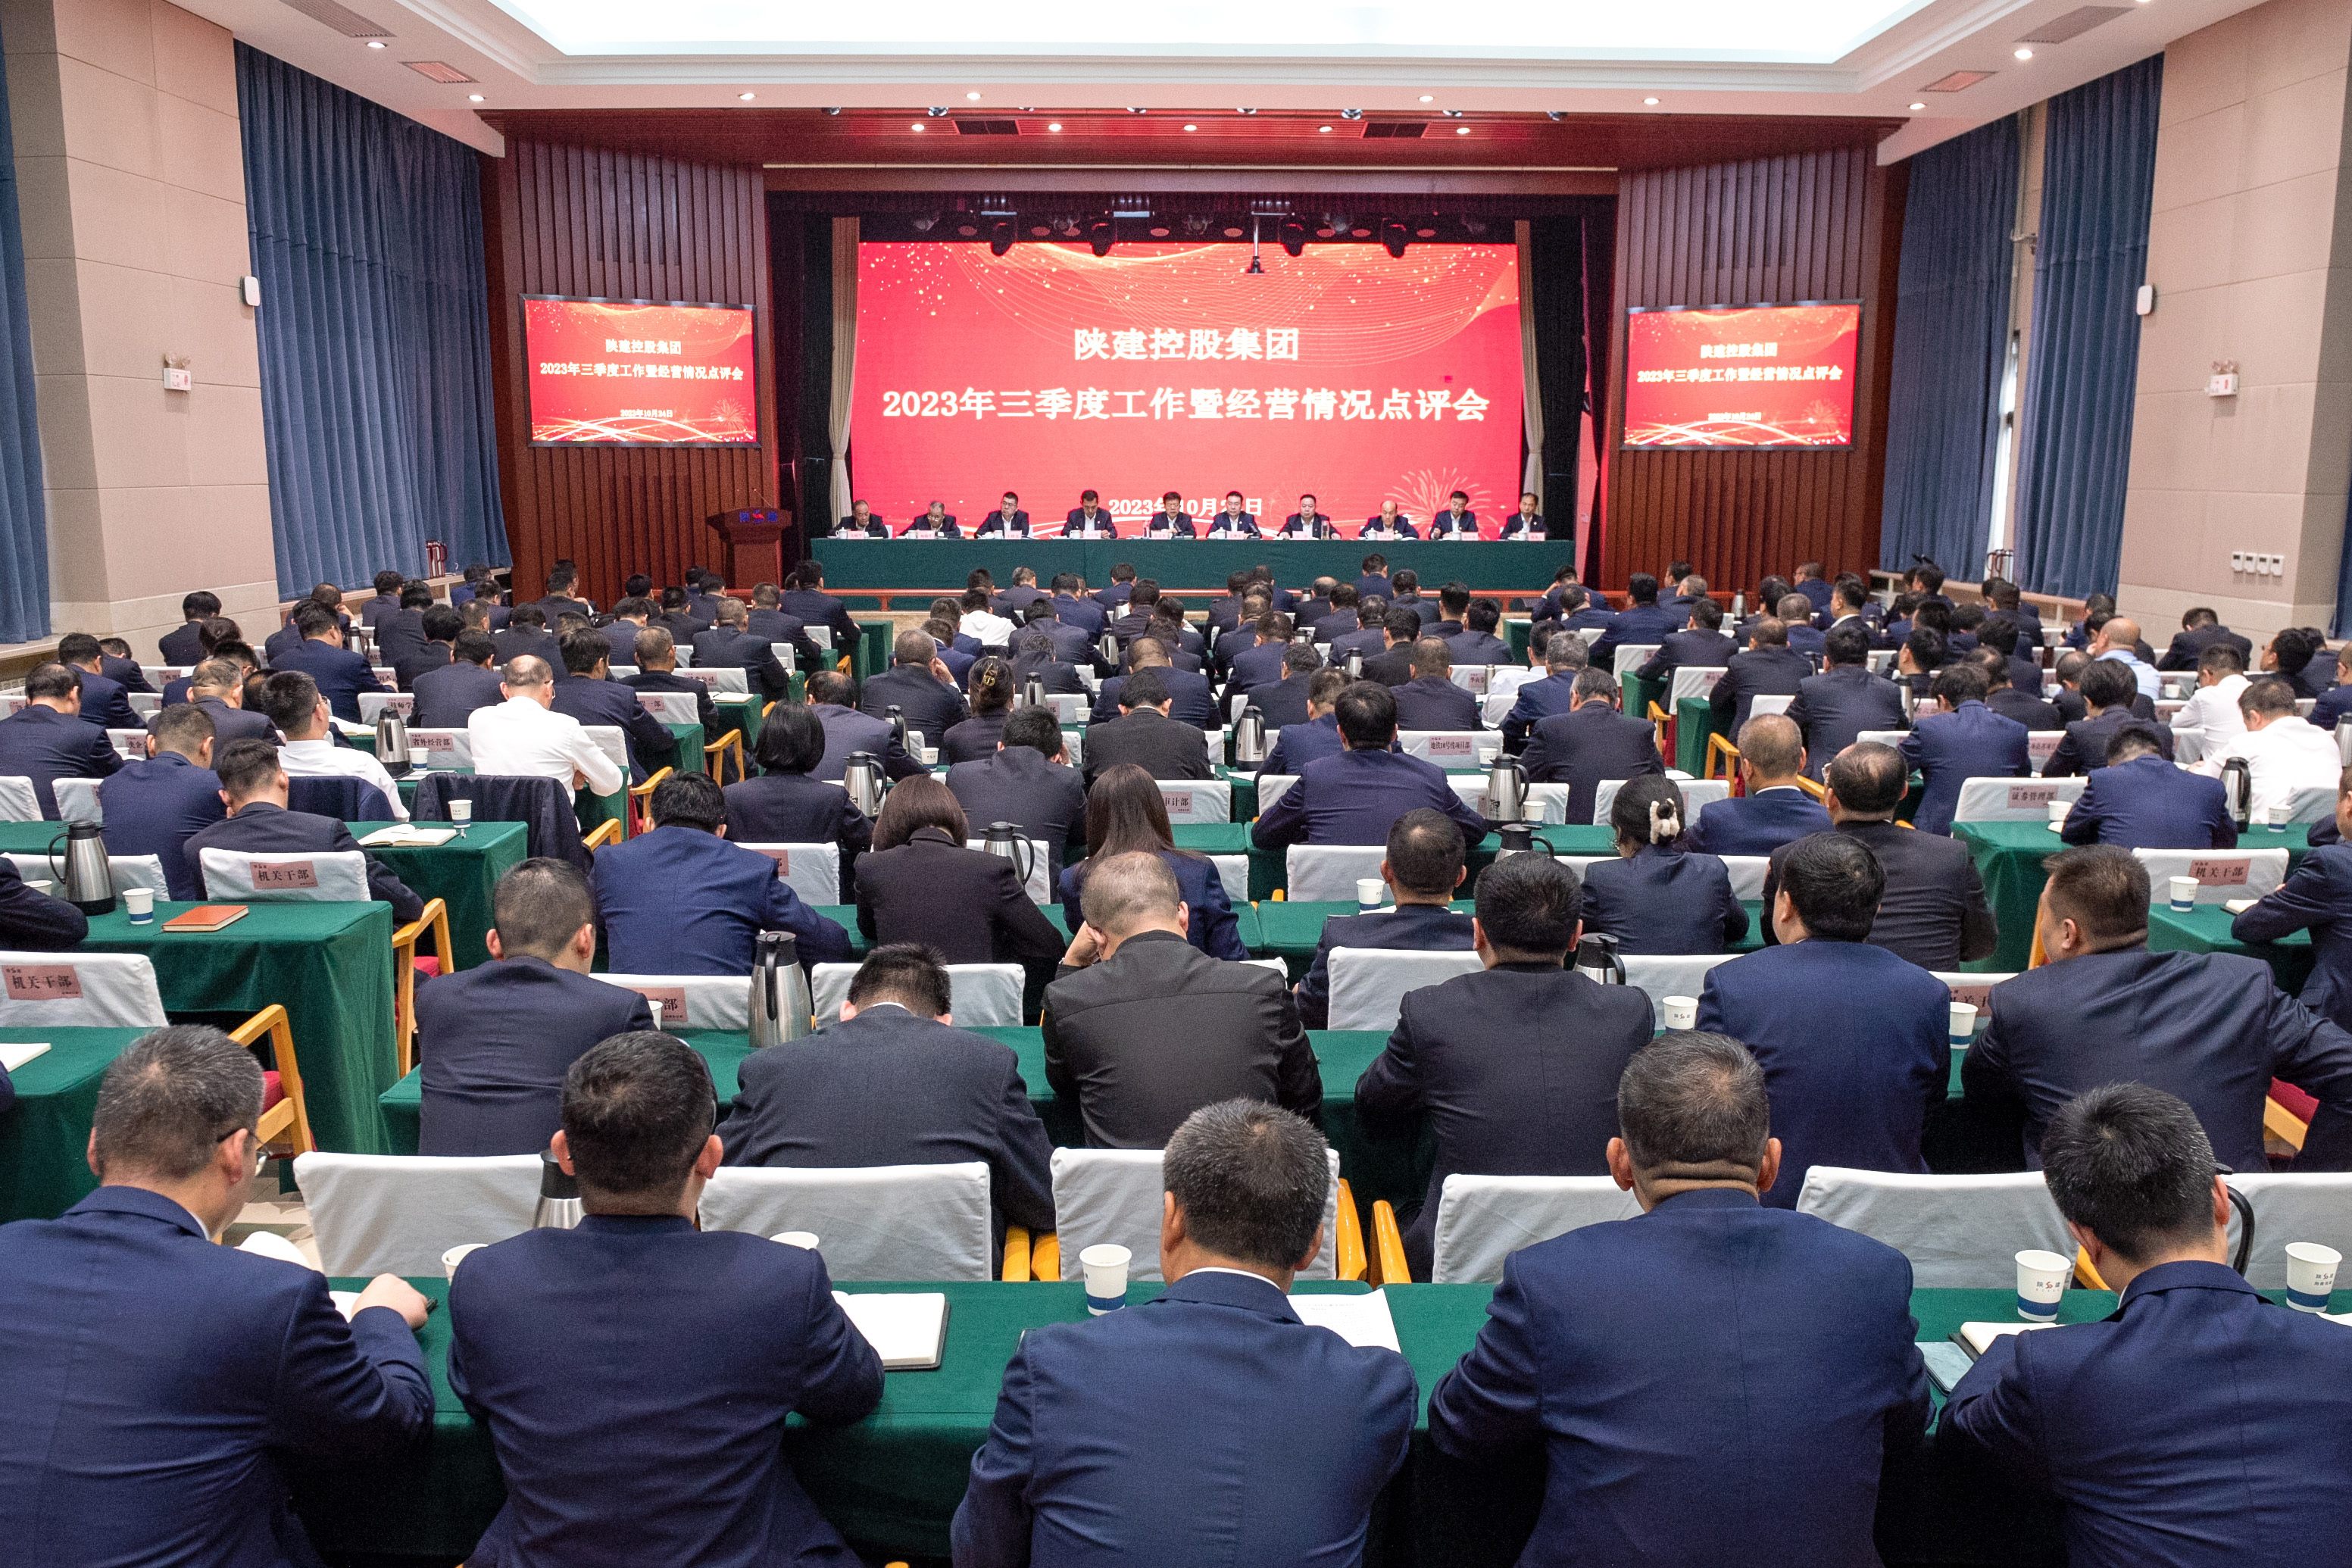 Shaanxi Construction Holding held the third quarter of 2023 work and business review meeting